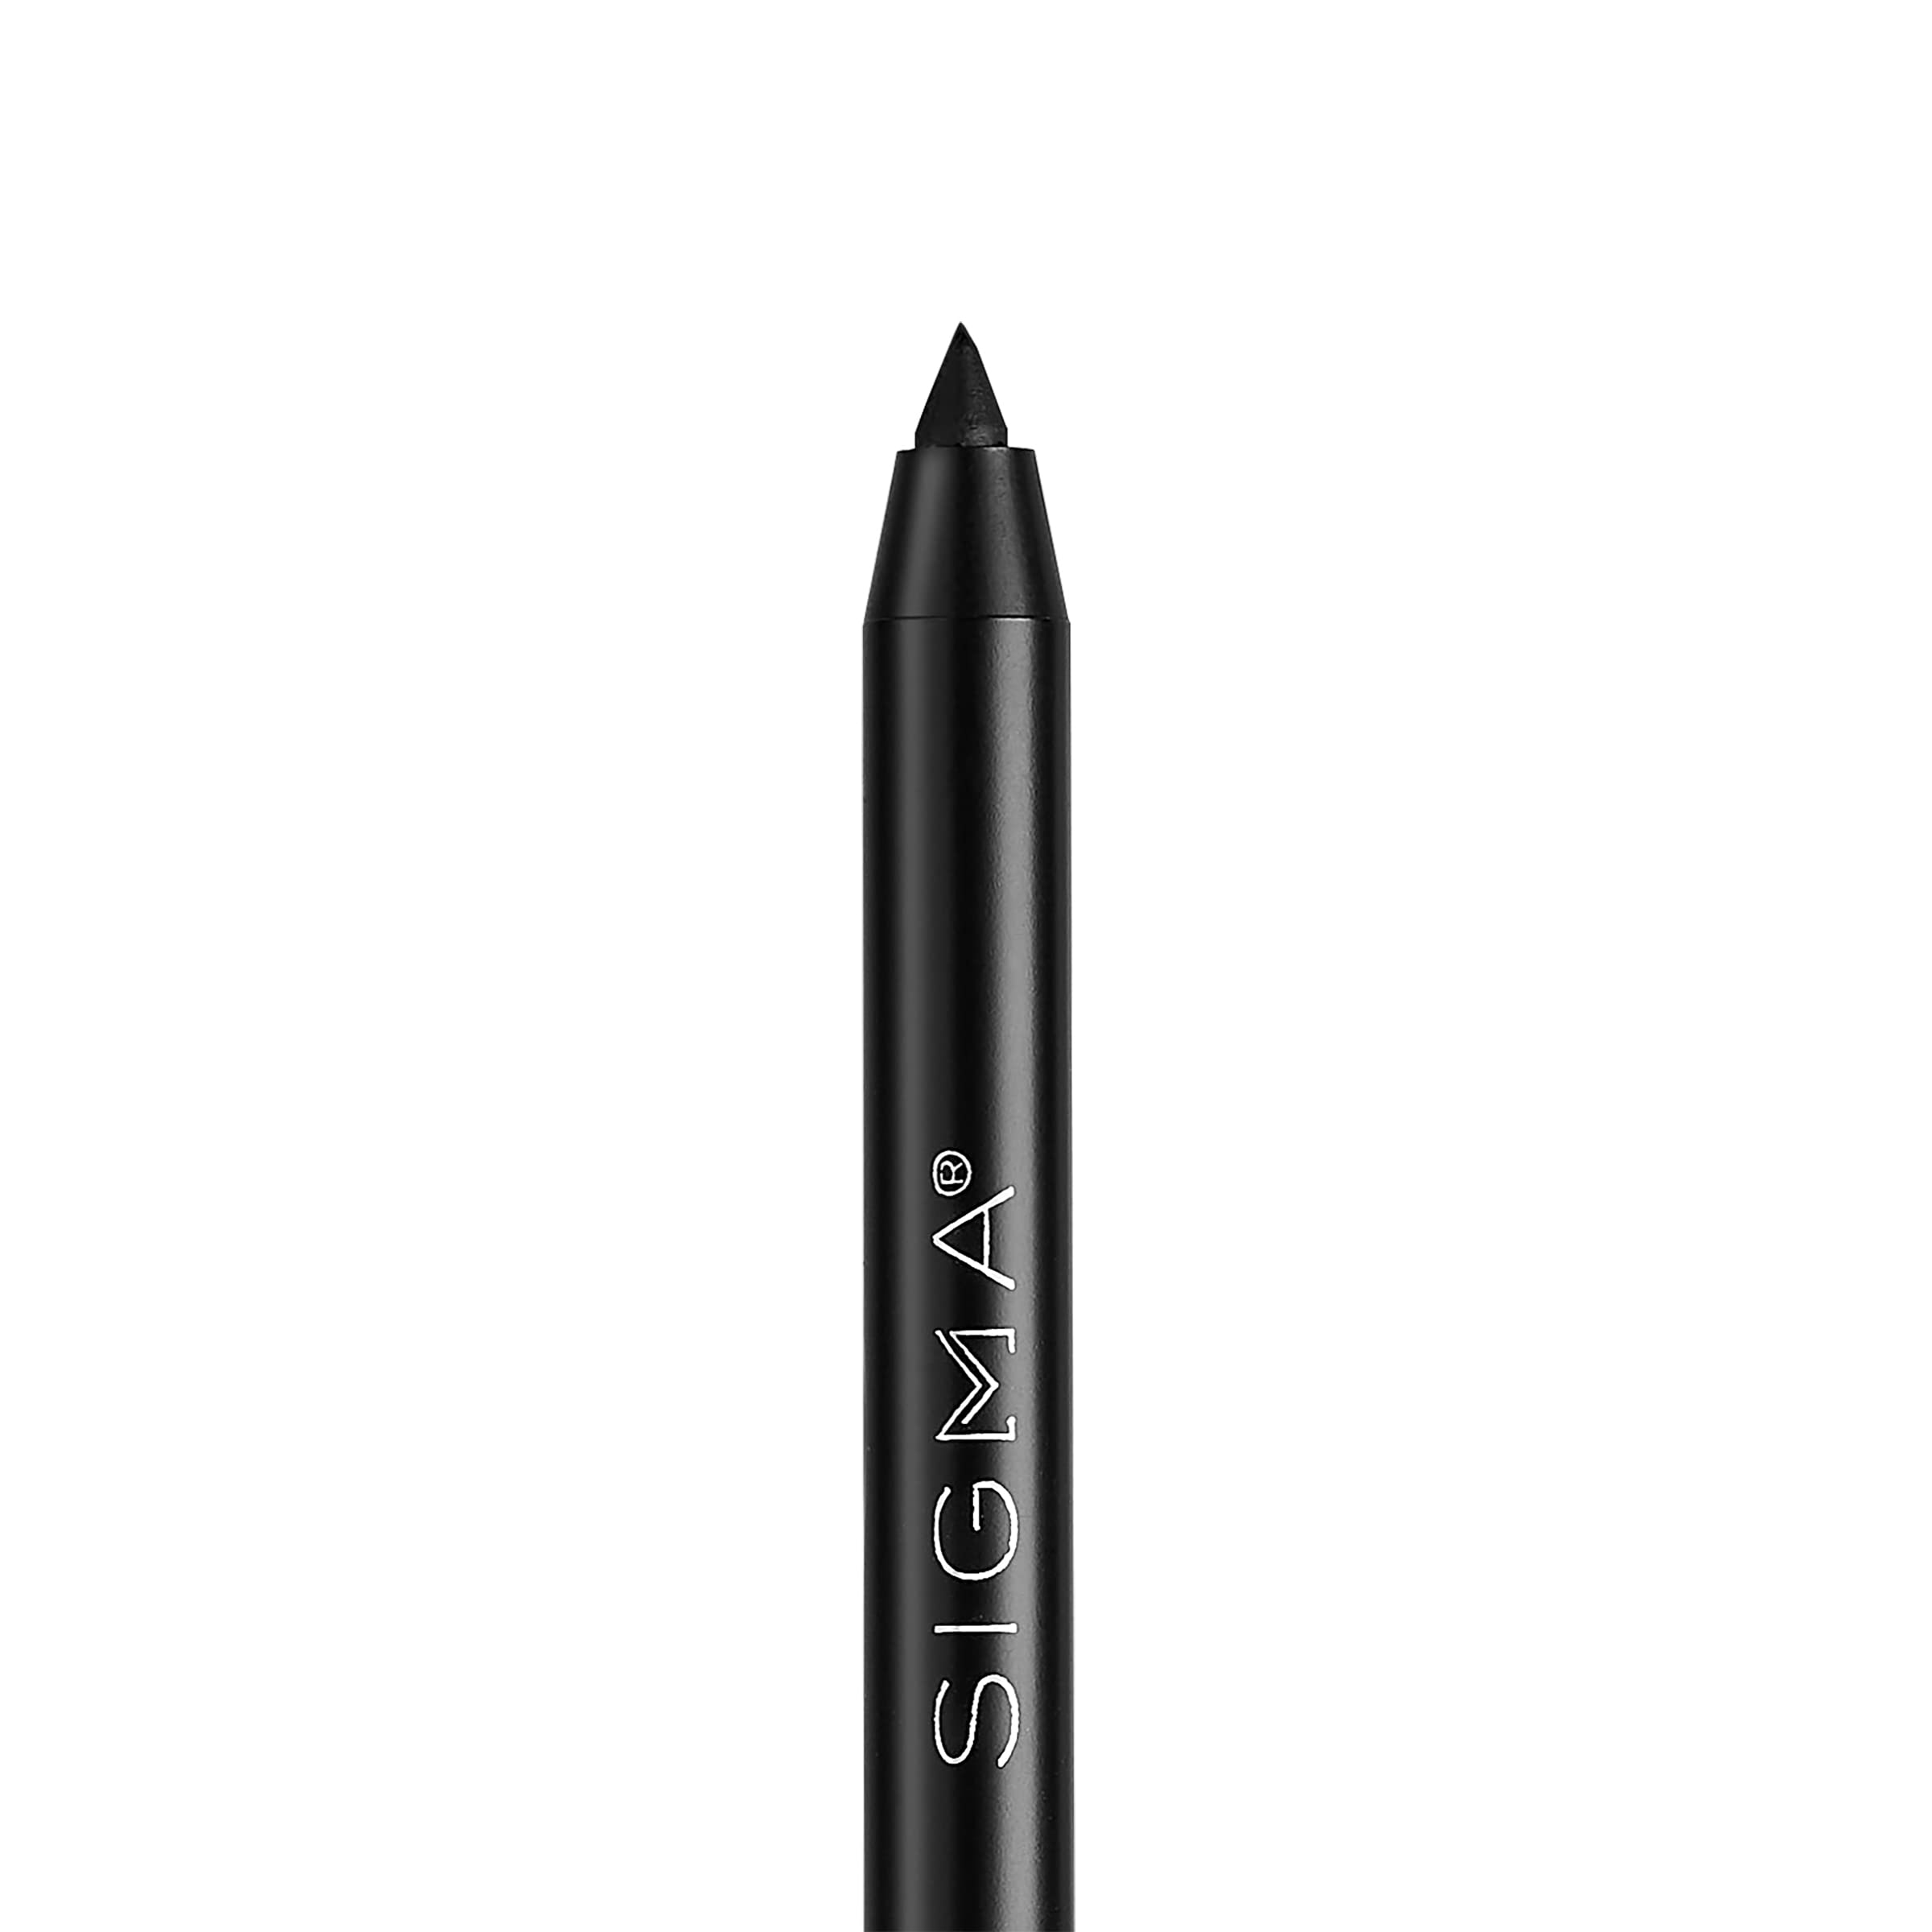 Sigma Beauty Long Wear Eyeliner Pencil – Professional Makeup Eyeliner Pencil with a Fine, Precision Tip & Smooth, Matte Finish for Impeccable, All-Day Eye Liner Application (Wicked Black)